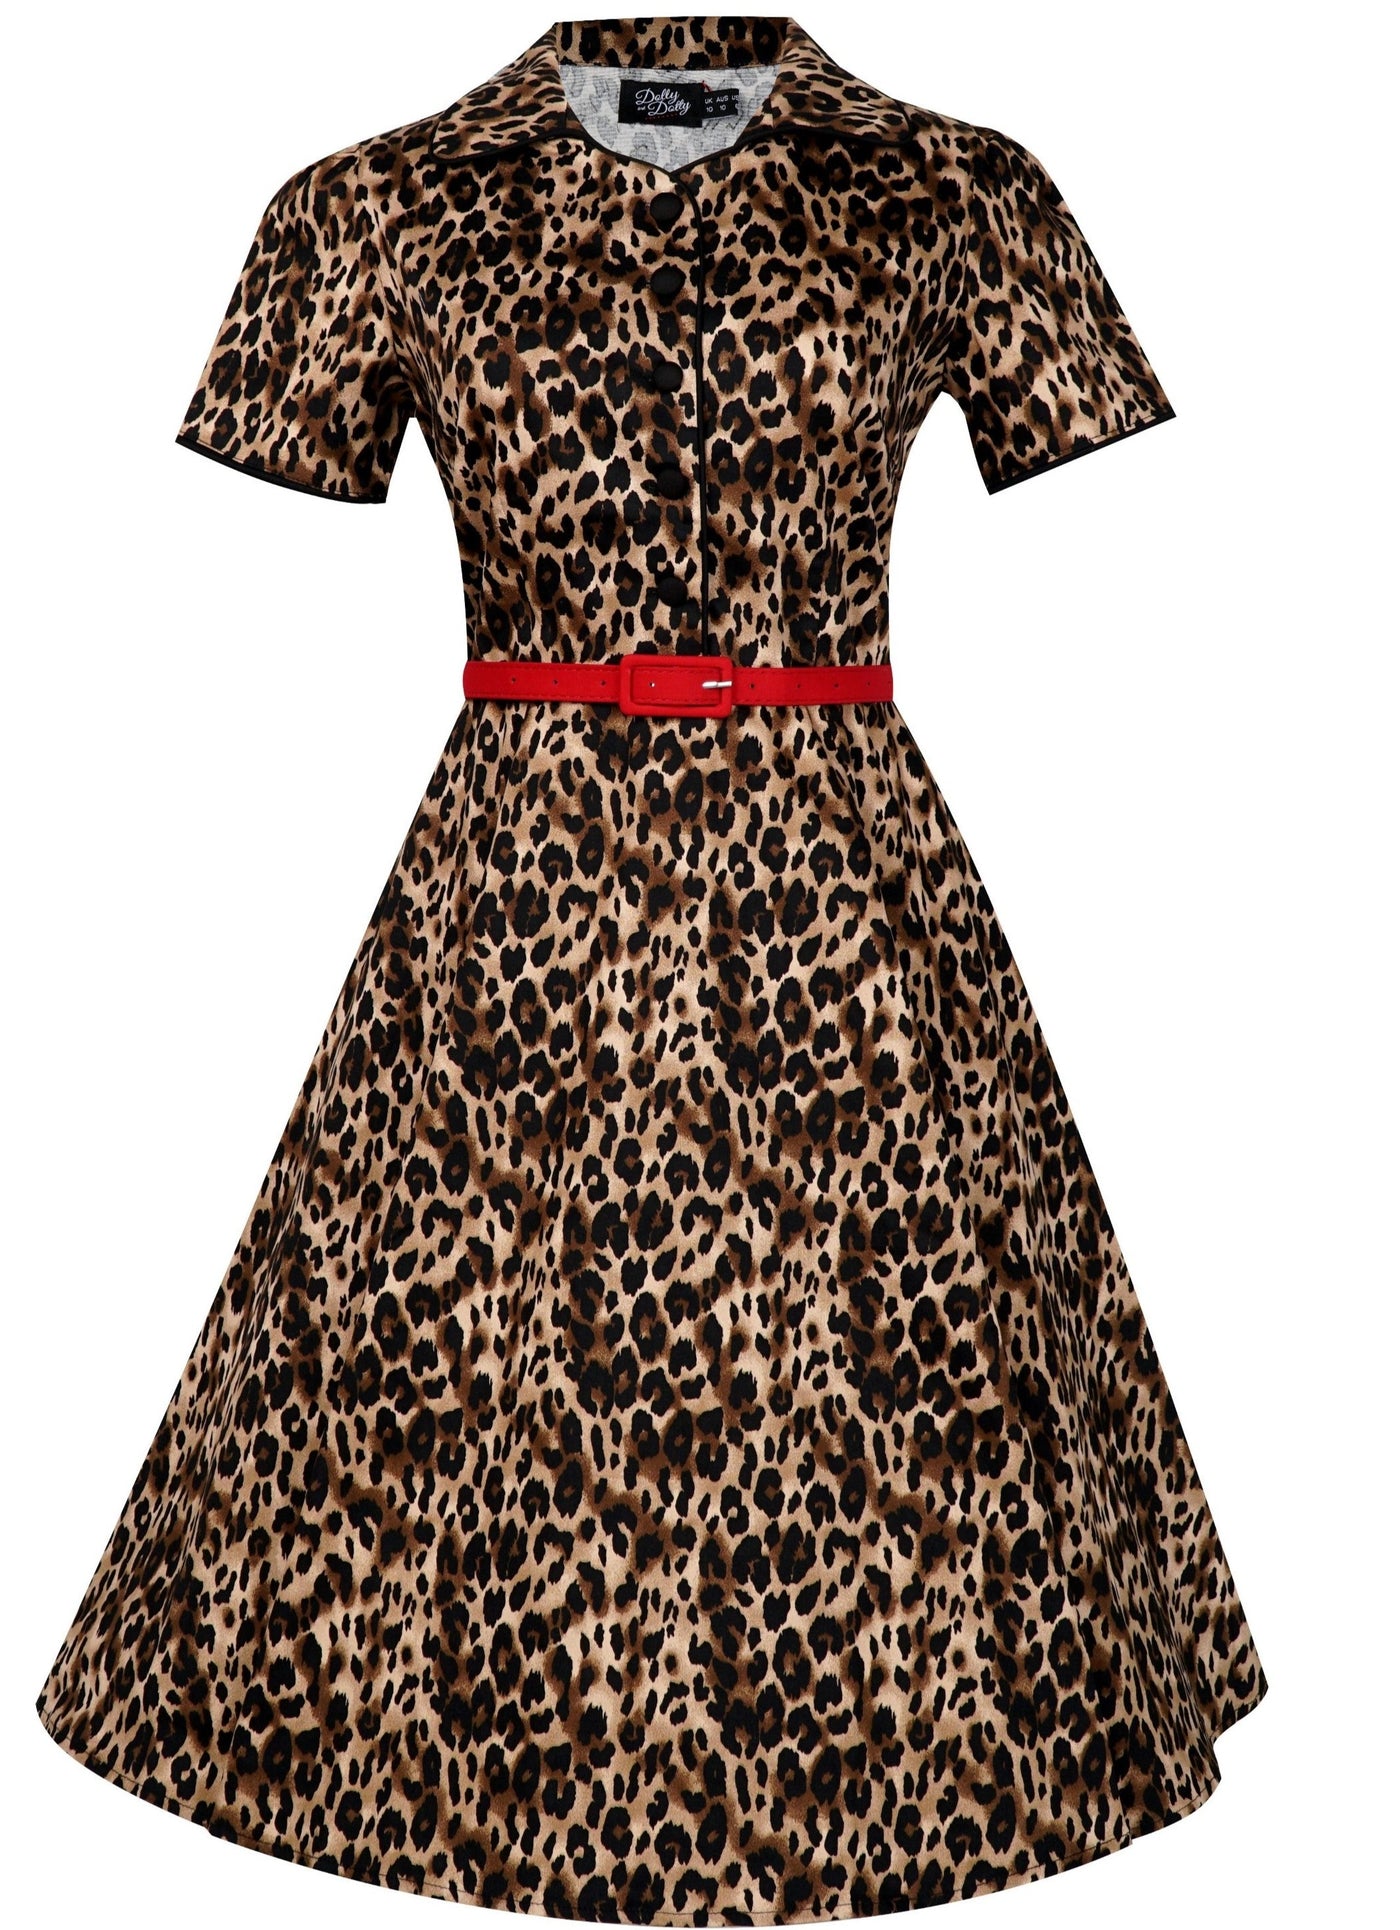 Short sleeve Penelope dress, in brown leopard print, front view